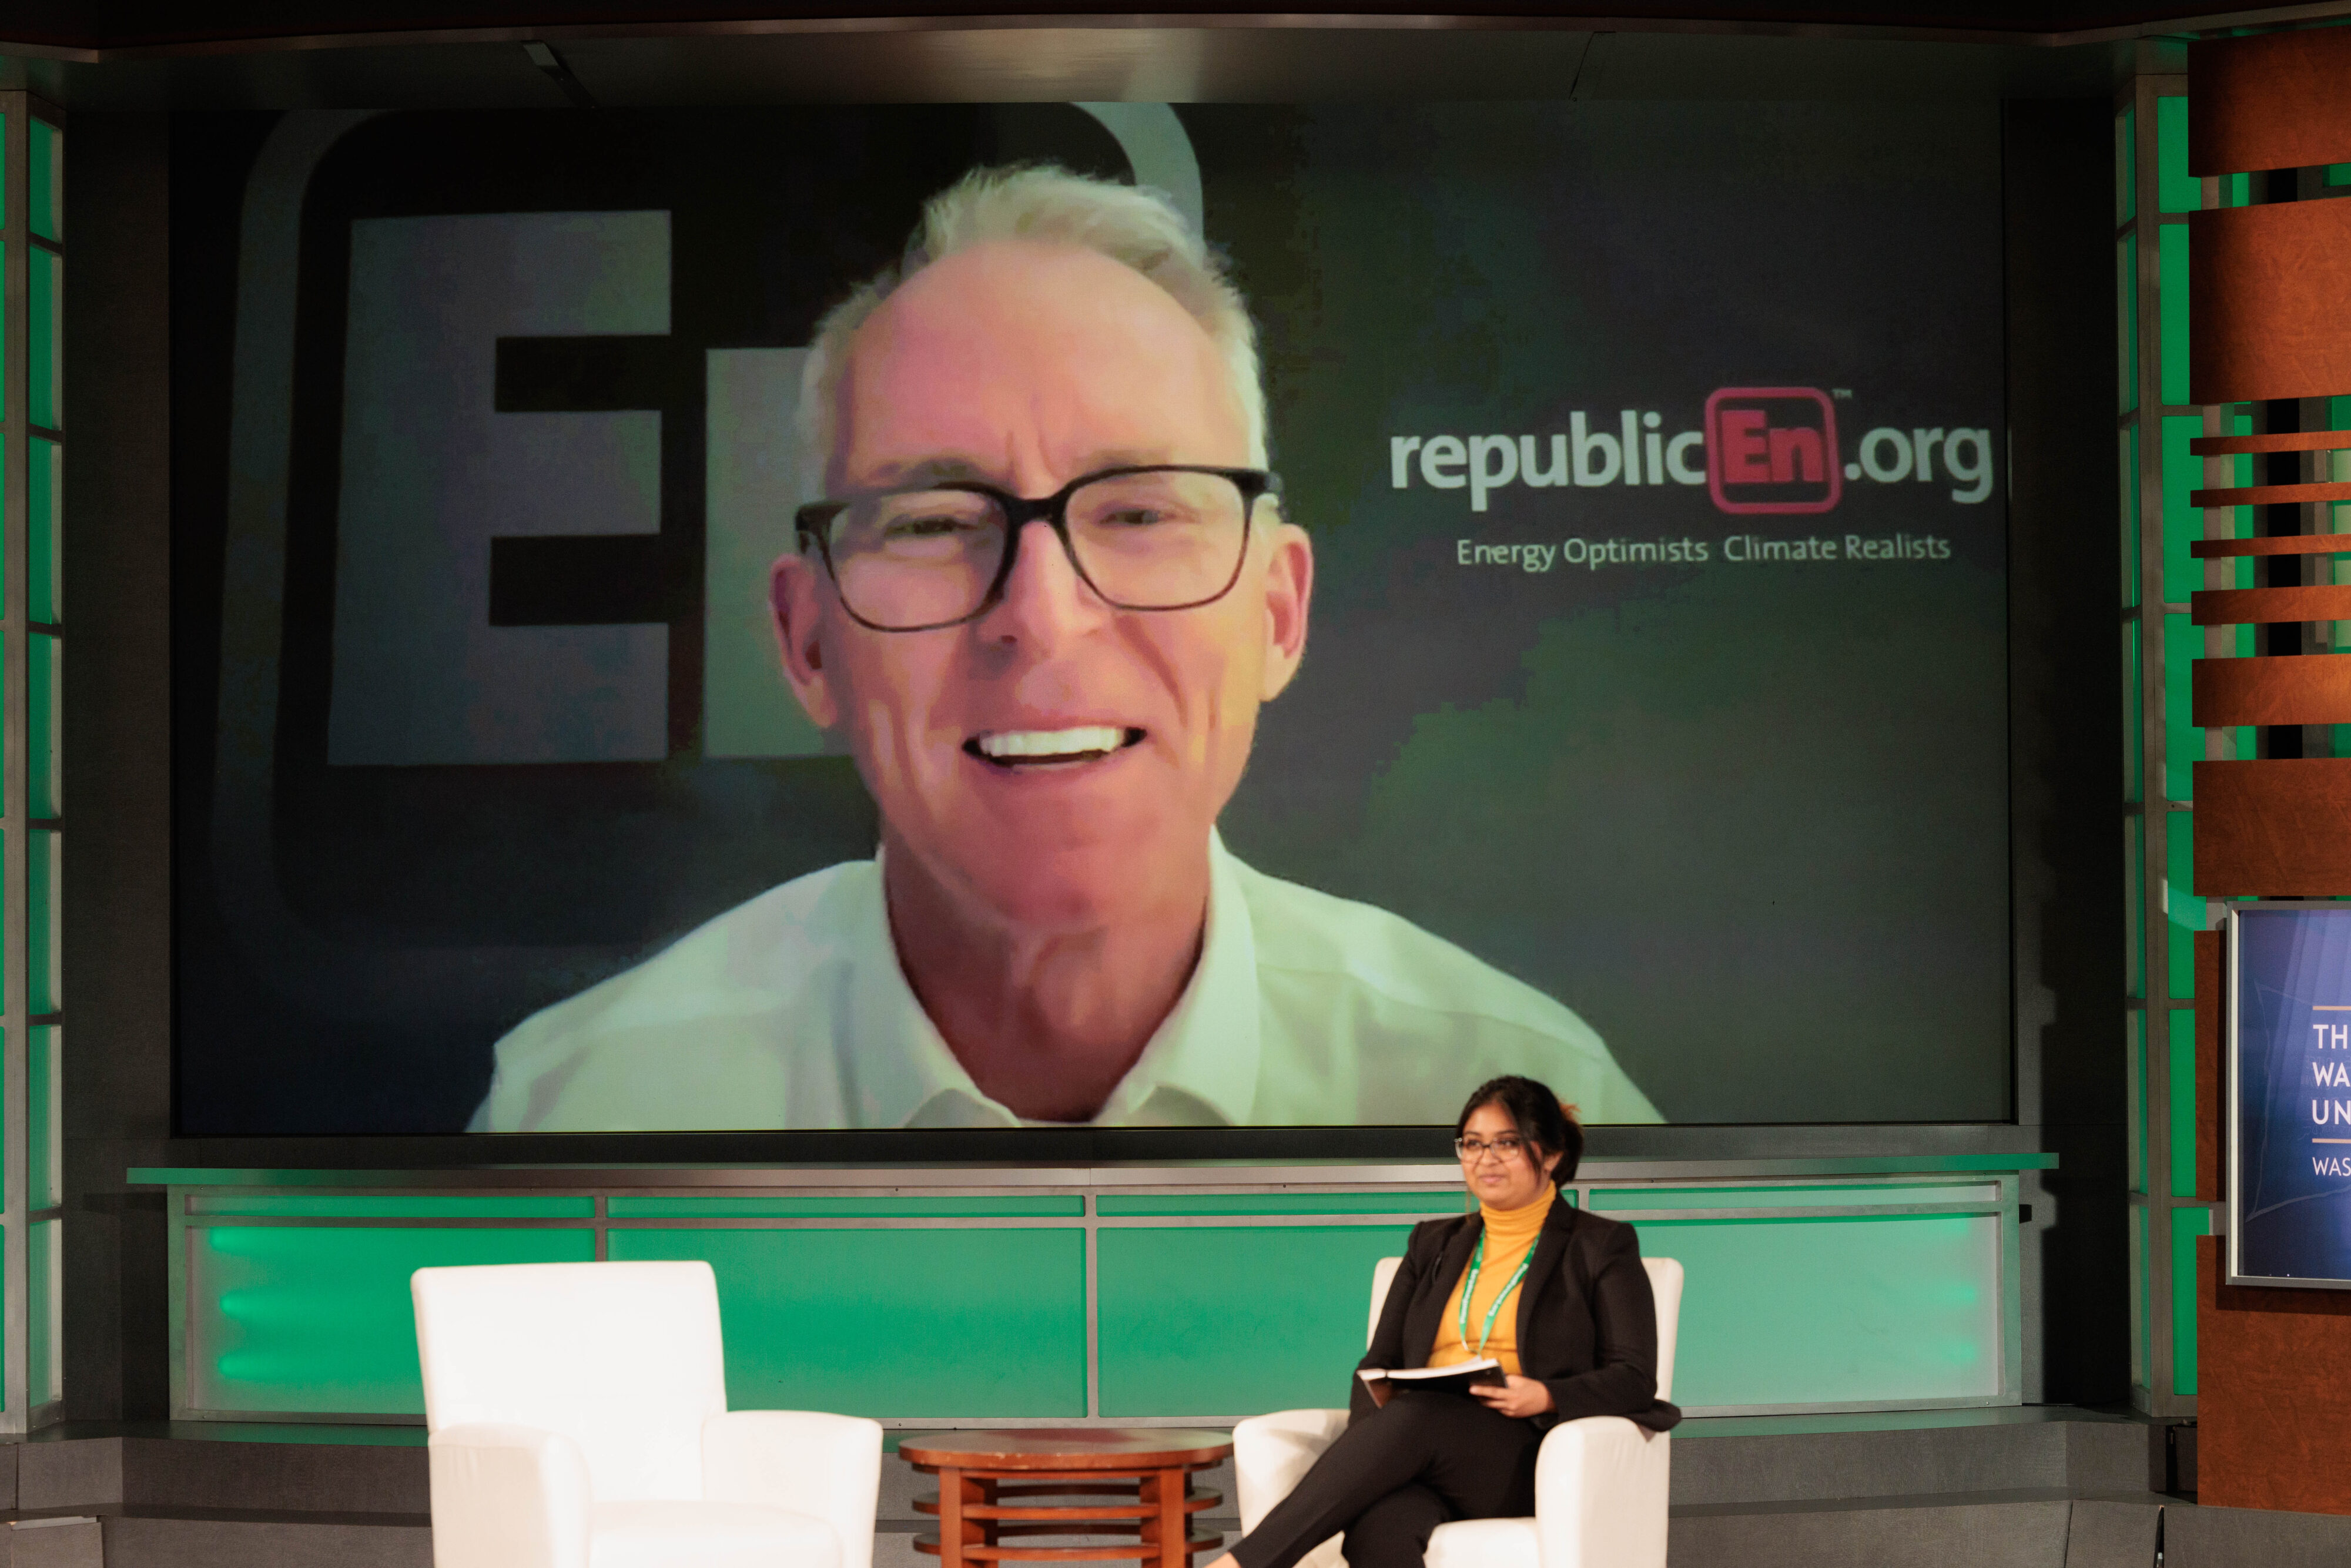 Bob Inglis, founder of RepublicEN.org, spoke with Planet Forward Correspondent Vidya Muthupillai about how to bridge the divide on climate issues. 